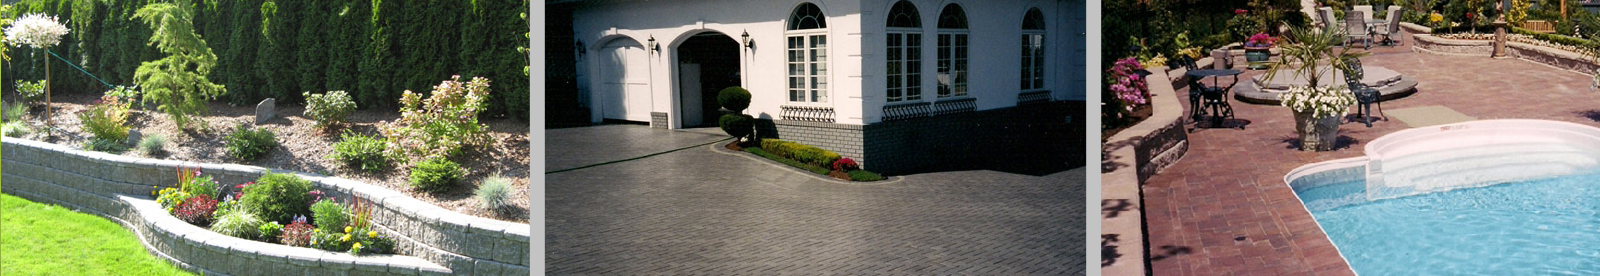 From natural or manufactured stone and brick driveways, patios, retaining walls, stairs to landscaping and water features, Walter's Landscaping Services can improve the look and value of your property.